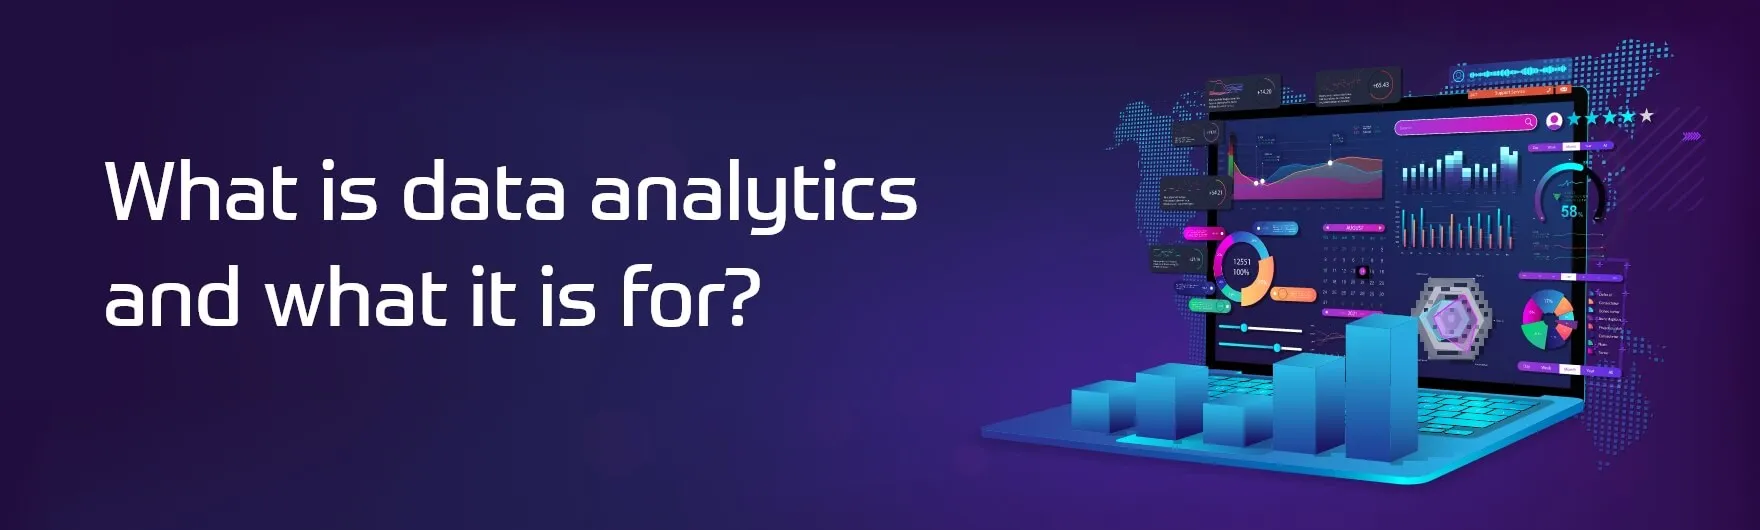 What is Data Analytics and what is it for?